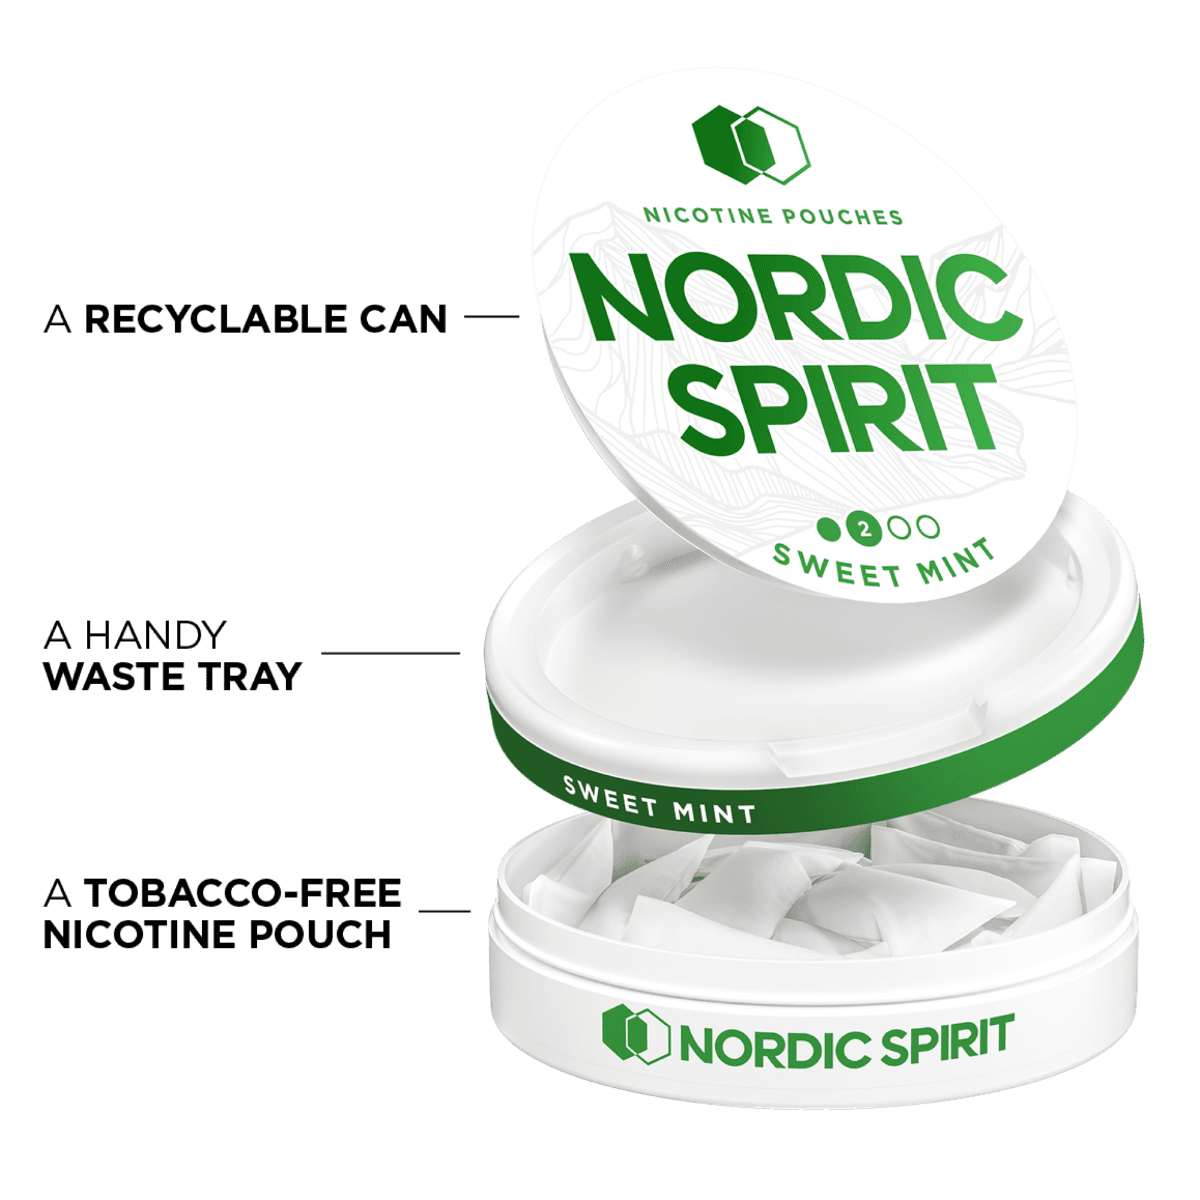 Can of Nordic Spirit Sweet Mint Nicotine pouches in a regular strength, it's opened showing that the can contains nicotine pouches, is made of recyclable material and has a storage try for used pouches.